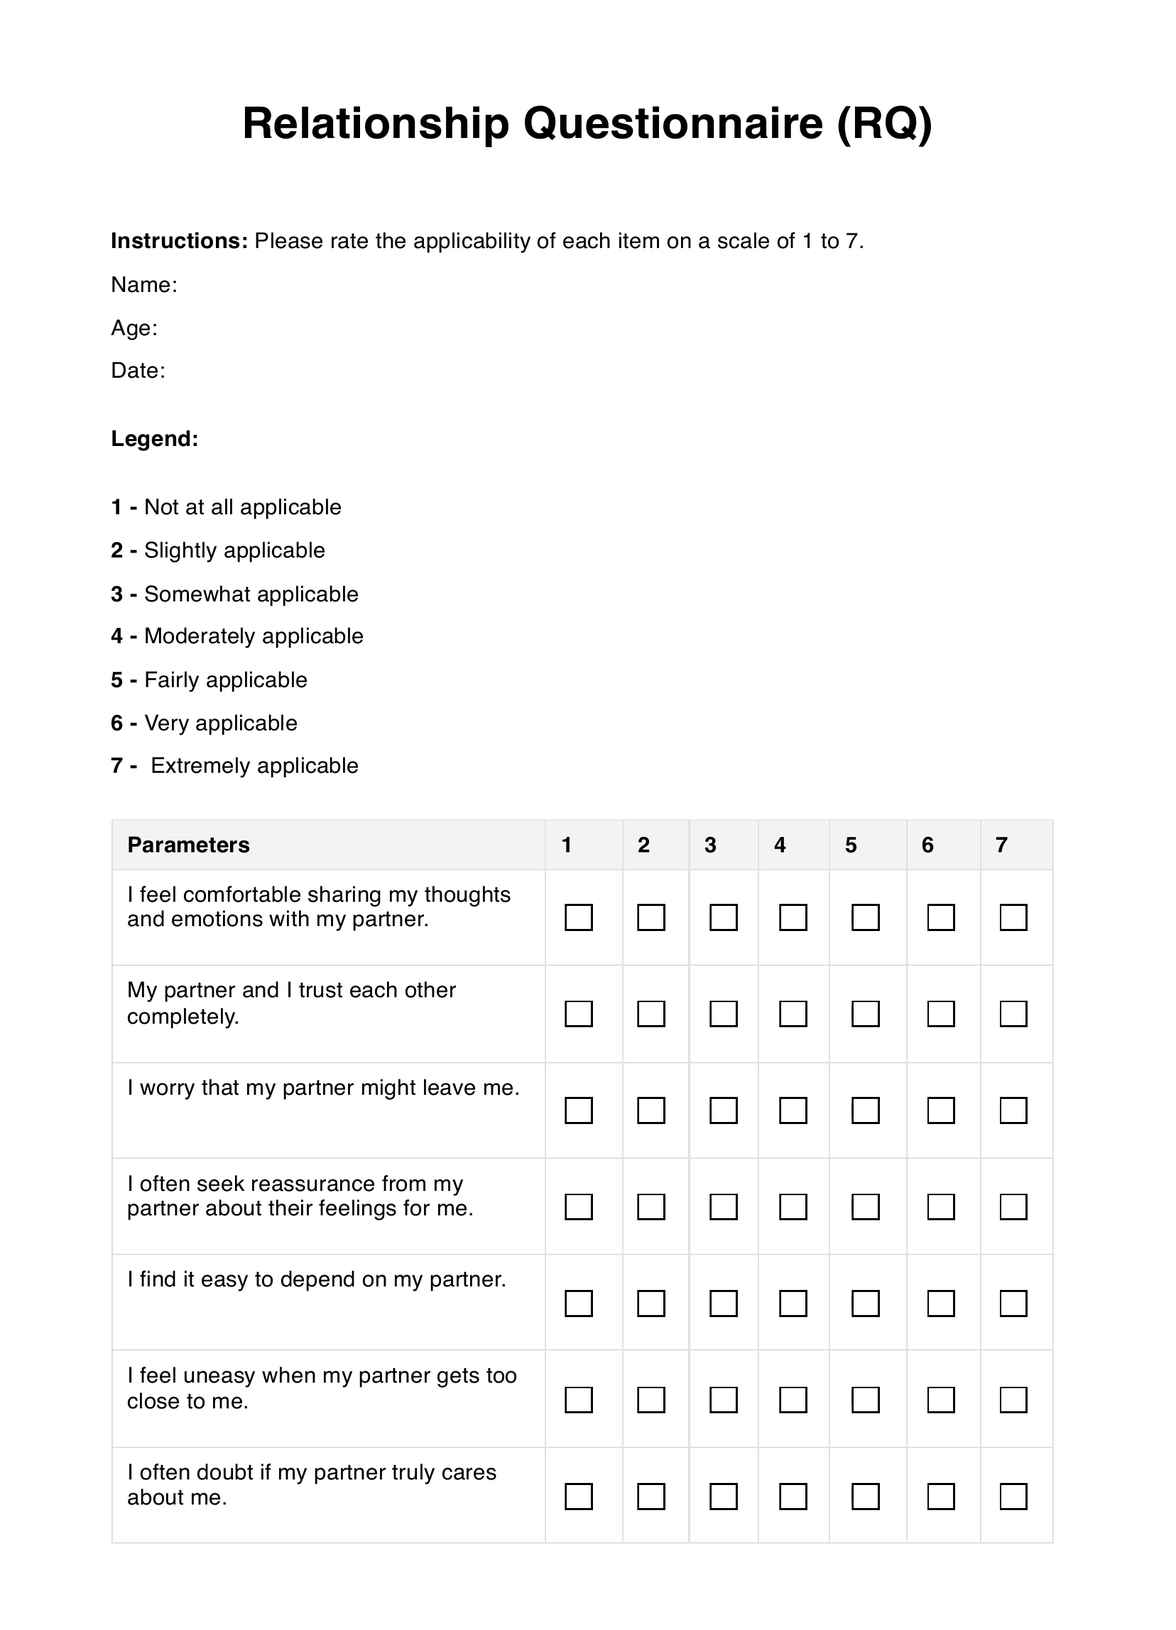 Relationship Questionnaire PDF Example